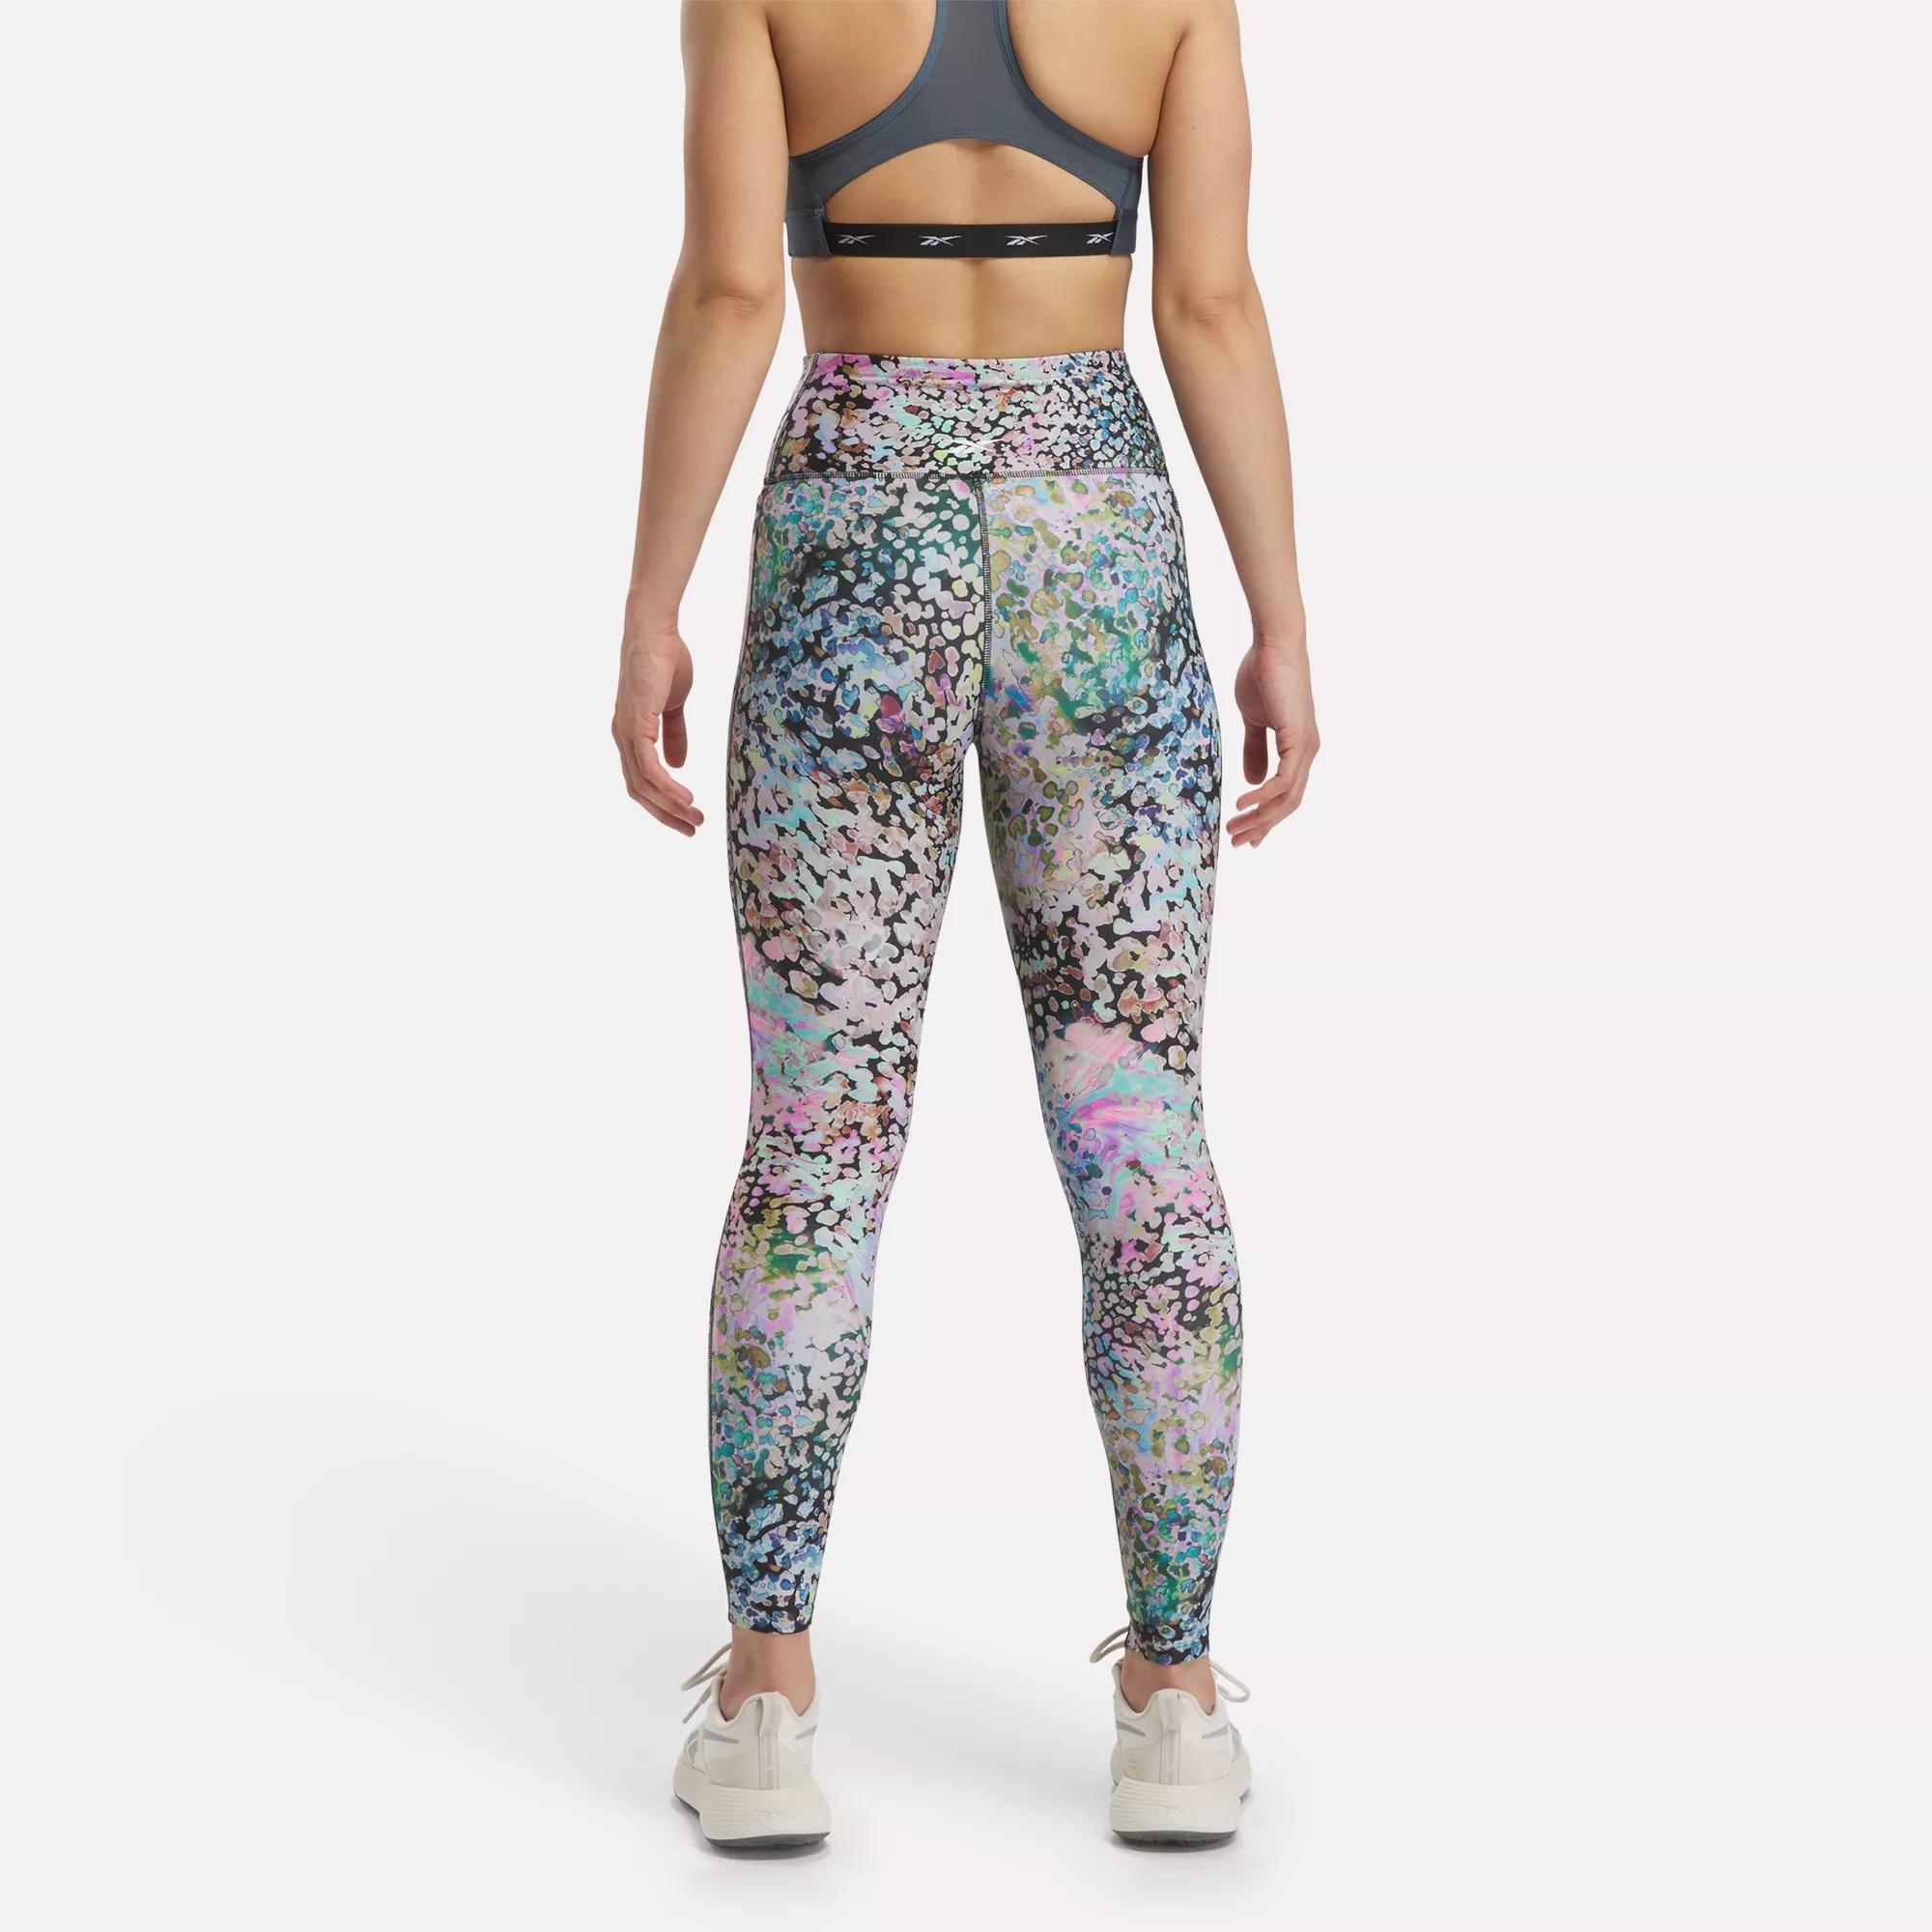 A Comprehensive Review of all my leggings (with pictures) - Lulu, Reebok,  Fabletics, ASOS, and more : r/xxfitness